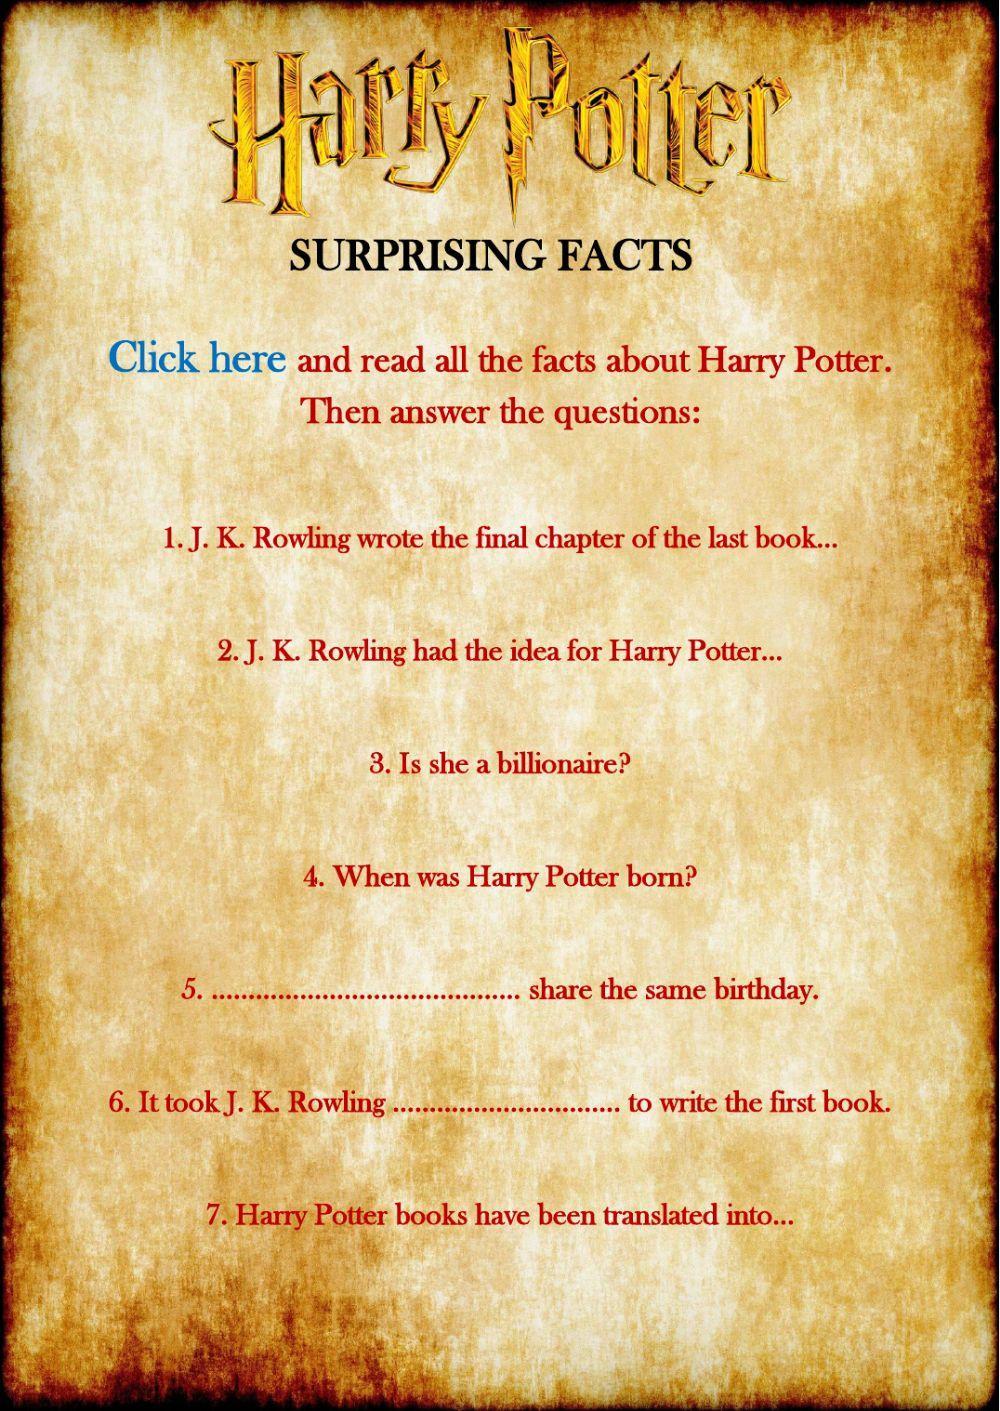 Harry Potter surprising facts